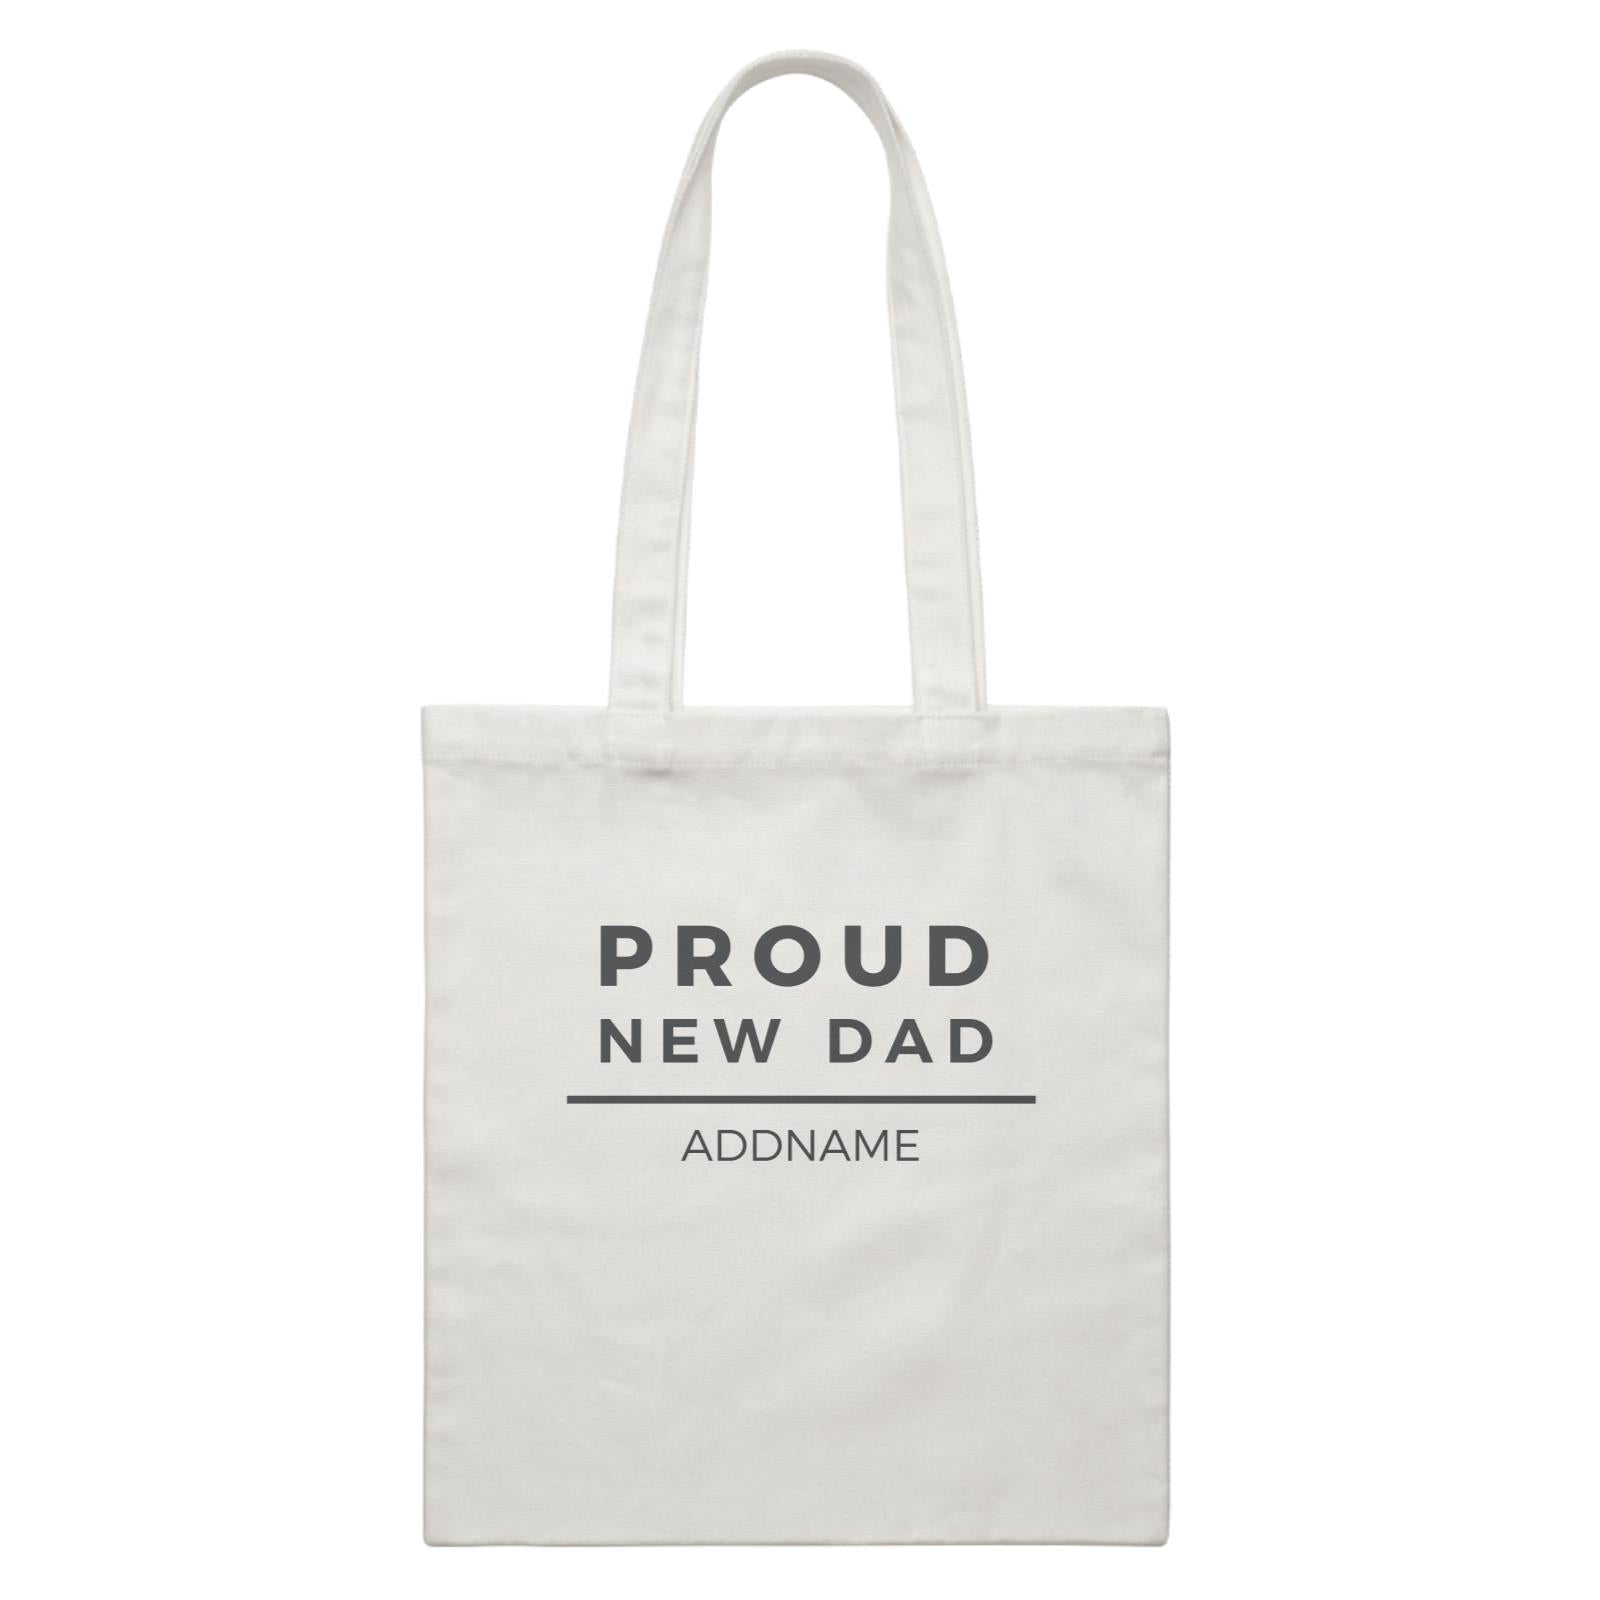 New Parent 1 Proud New Dad Addname White Canvas Bag